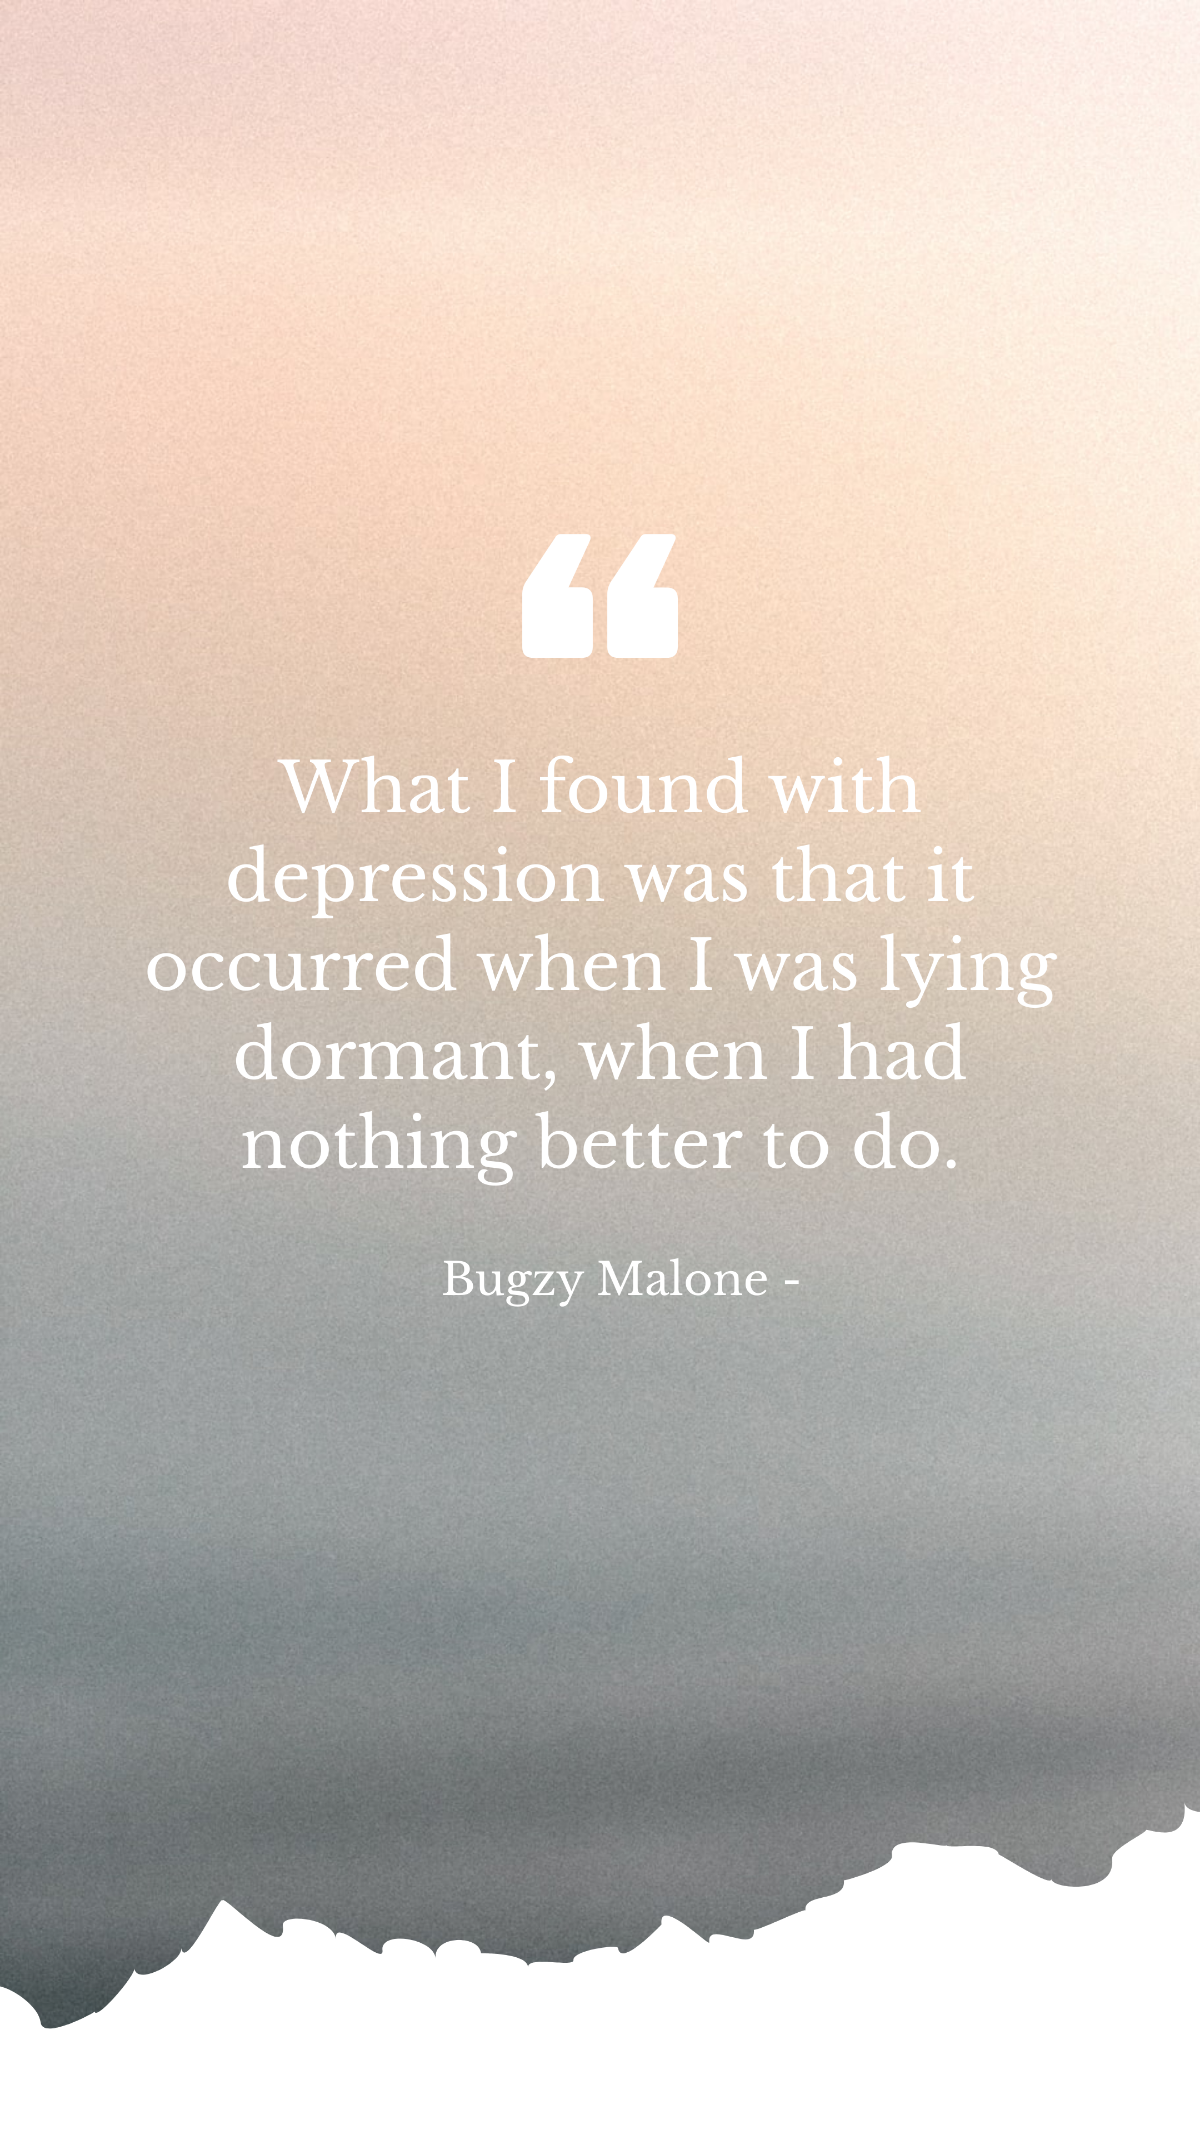 Bugzy Malone - What I found with depression was that it occurred when I was lying dormant, when I had nothing better to do. Template